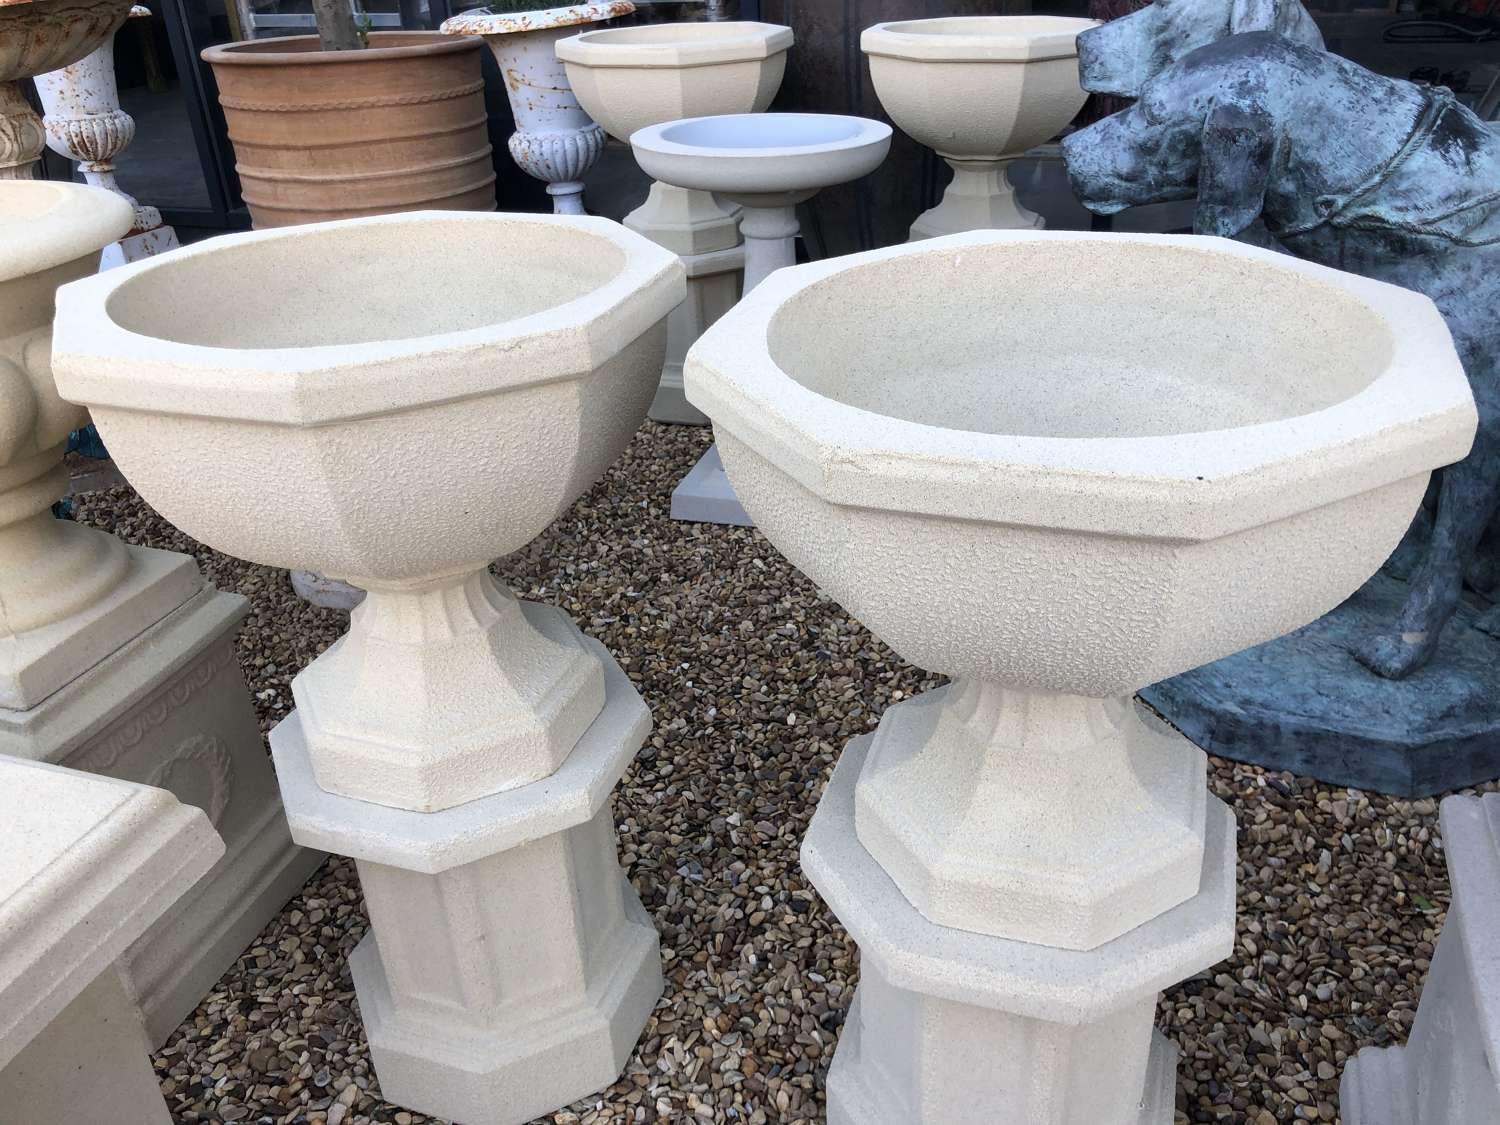 Pair of Hexagonal Stone Urns and Plinths